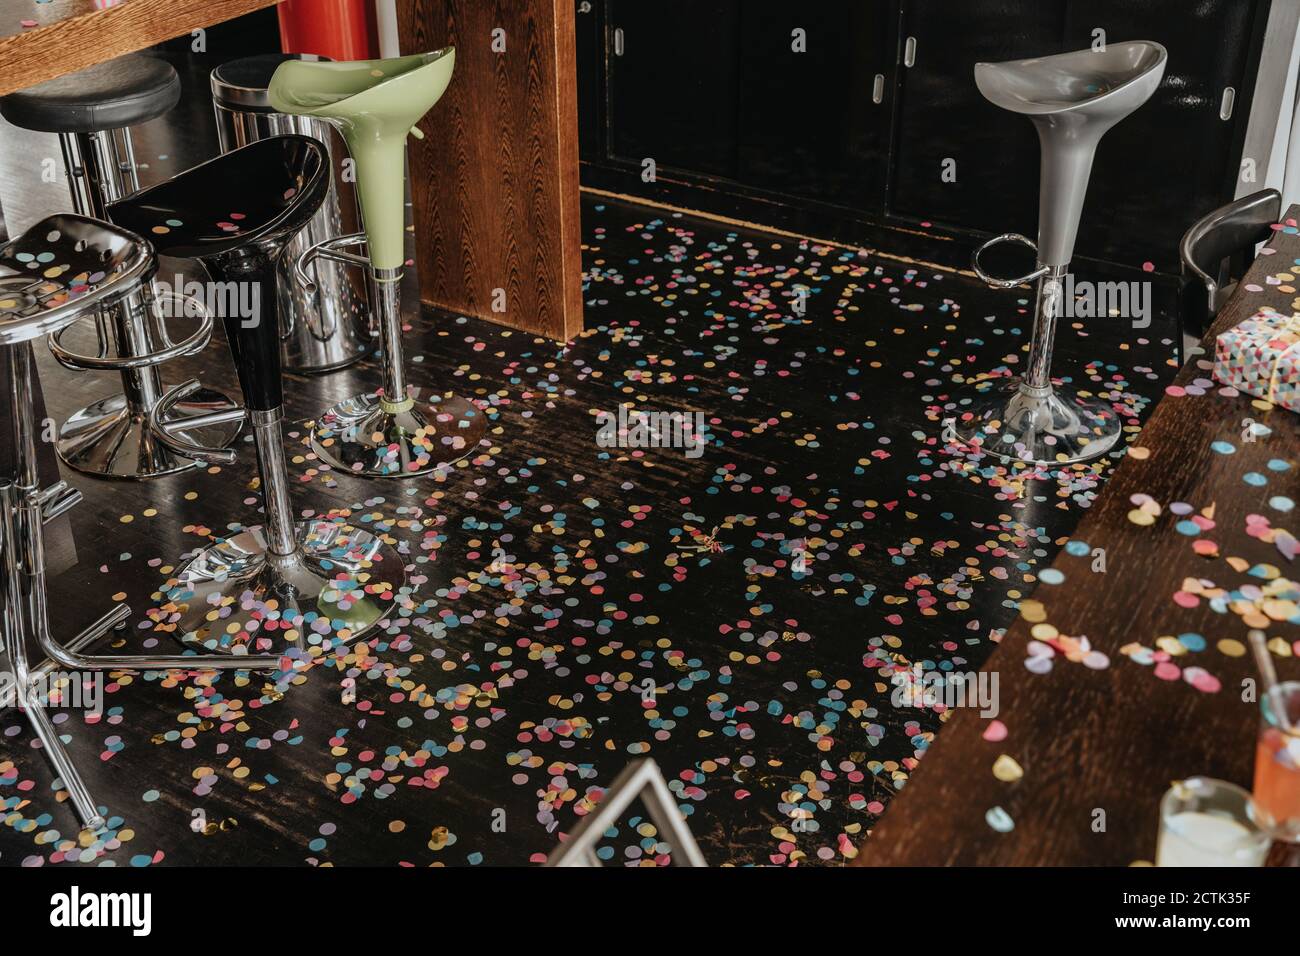 Confetti on floor at home after party Stock Photo